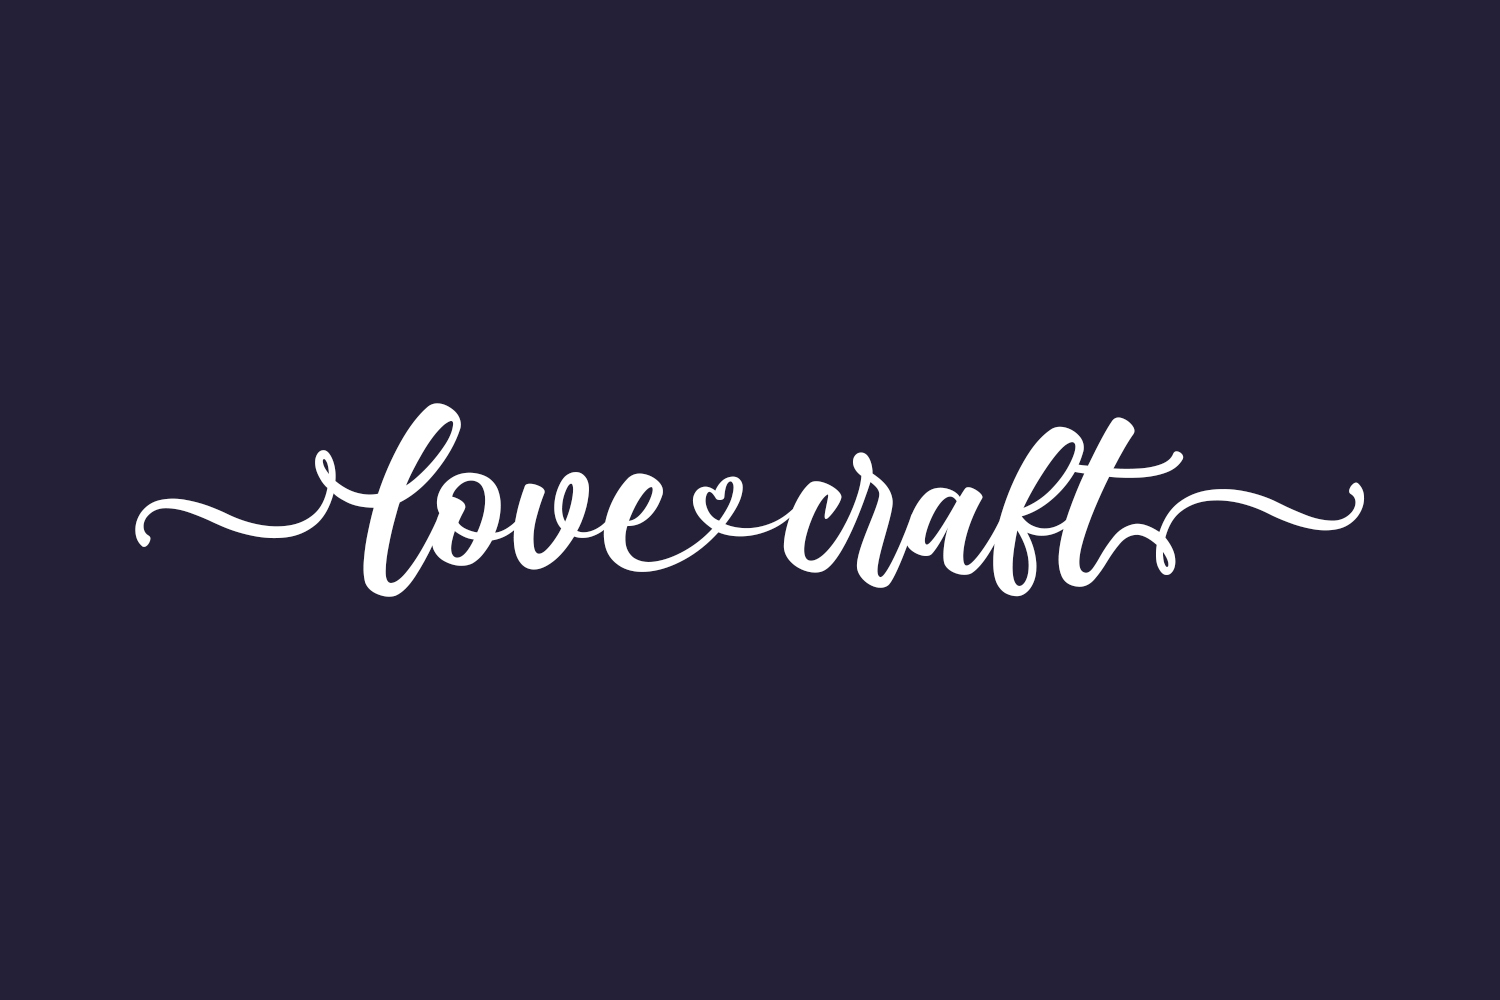 Lovecraft Free Font